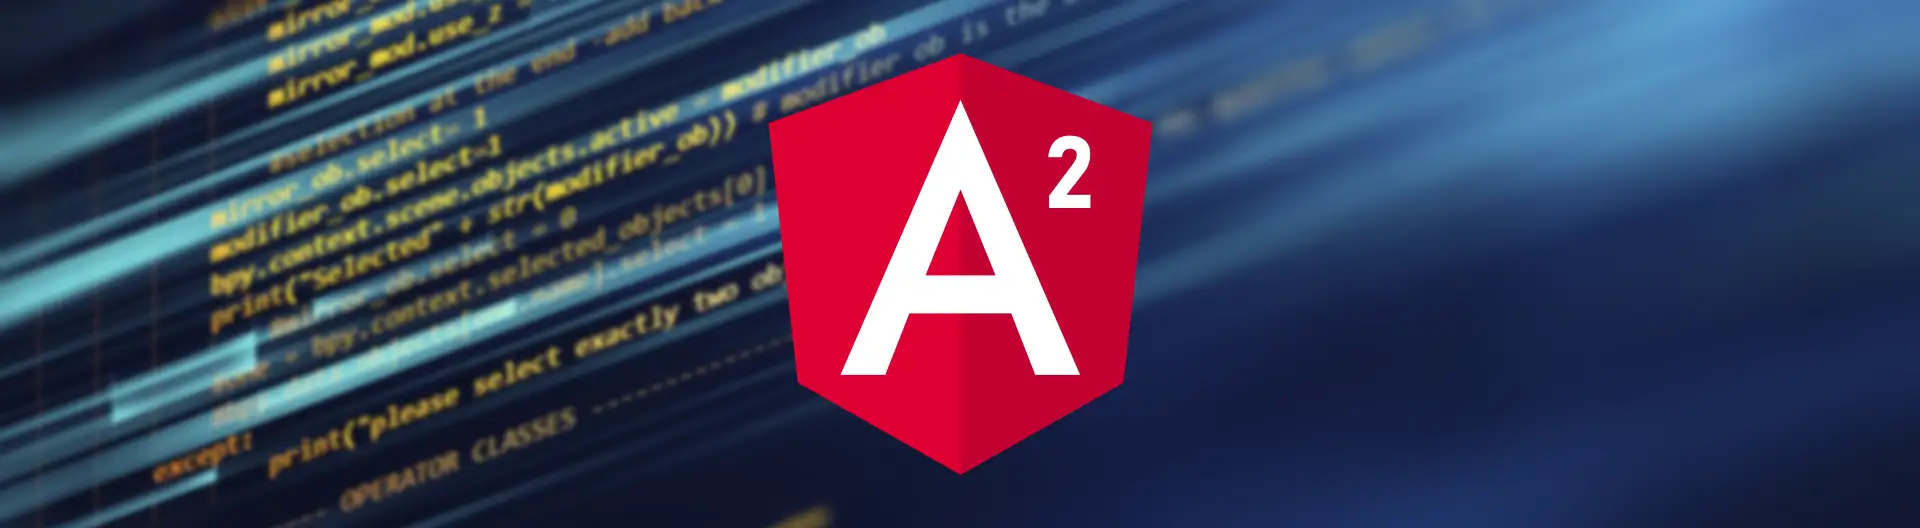 Upgrading to Angular 2.0 Experience: What Do You Need to Know - Banner